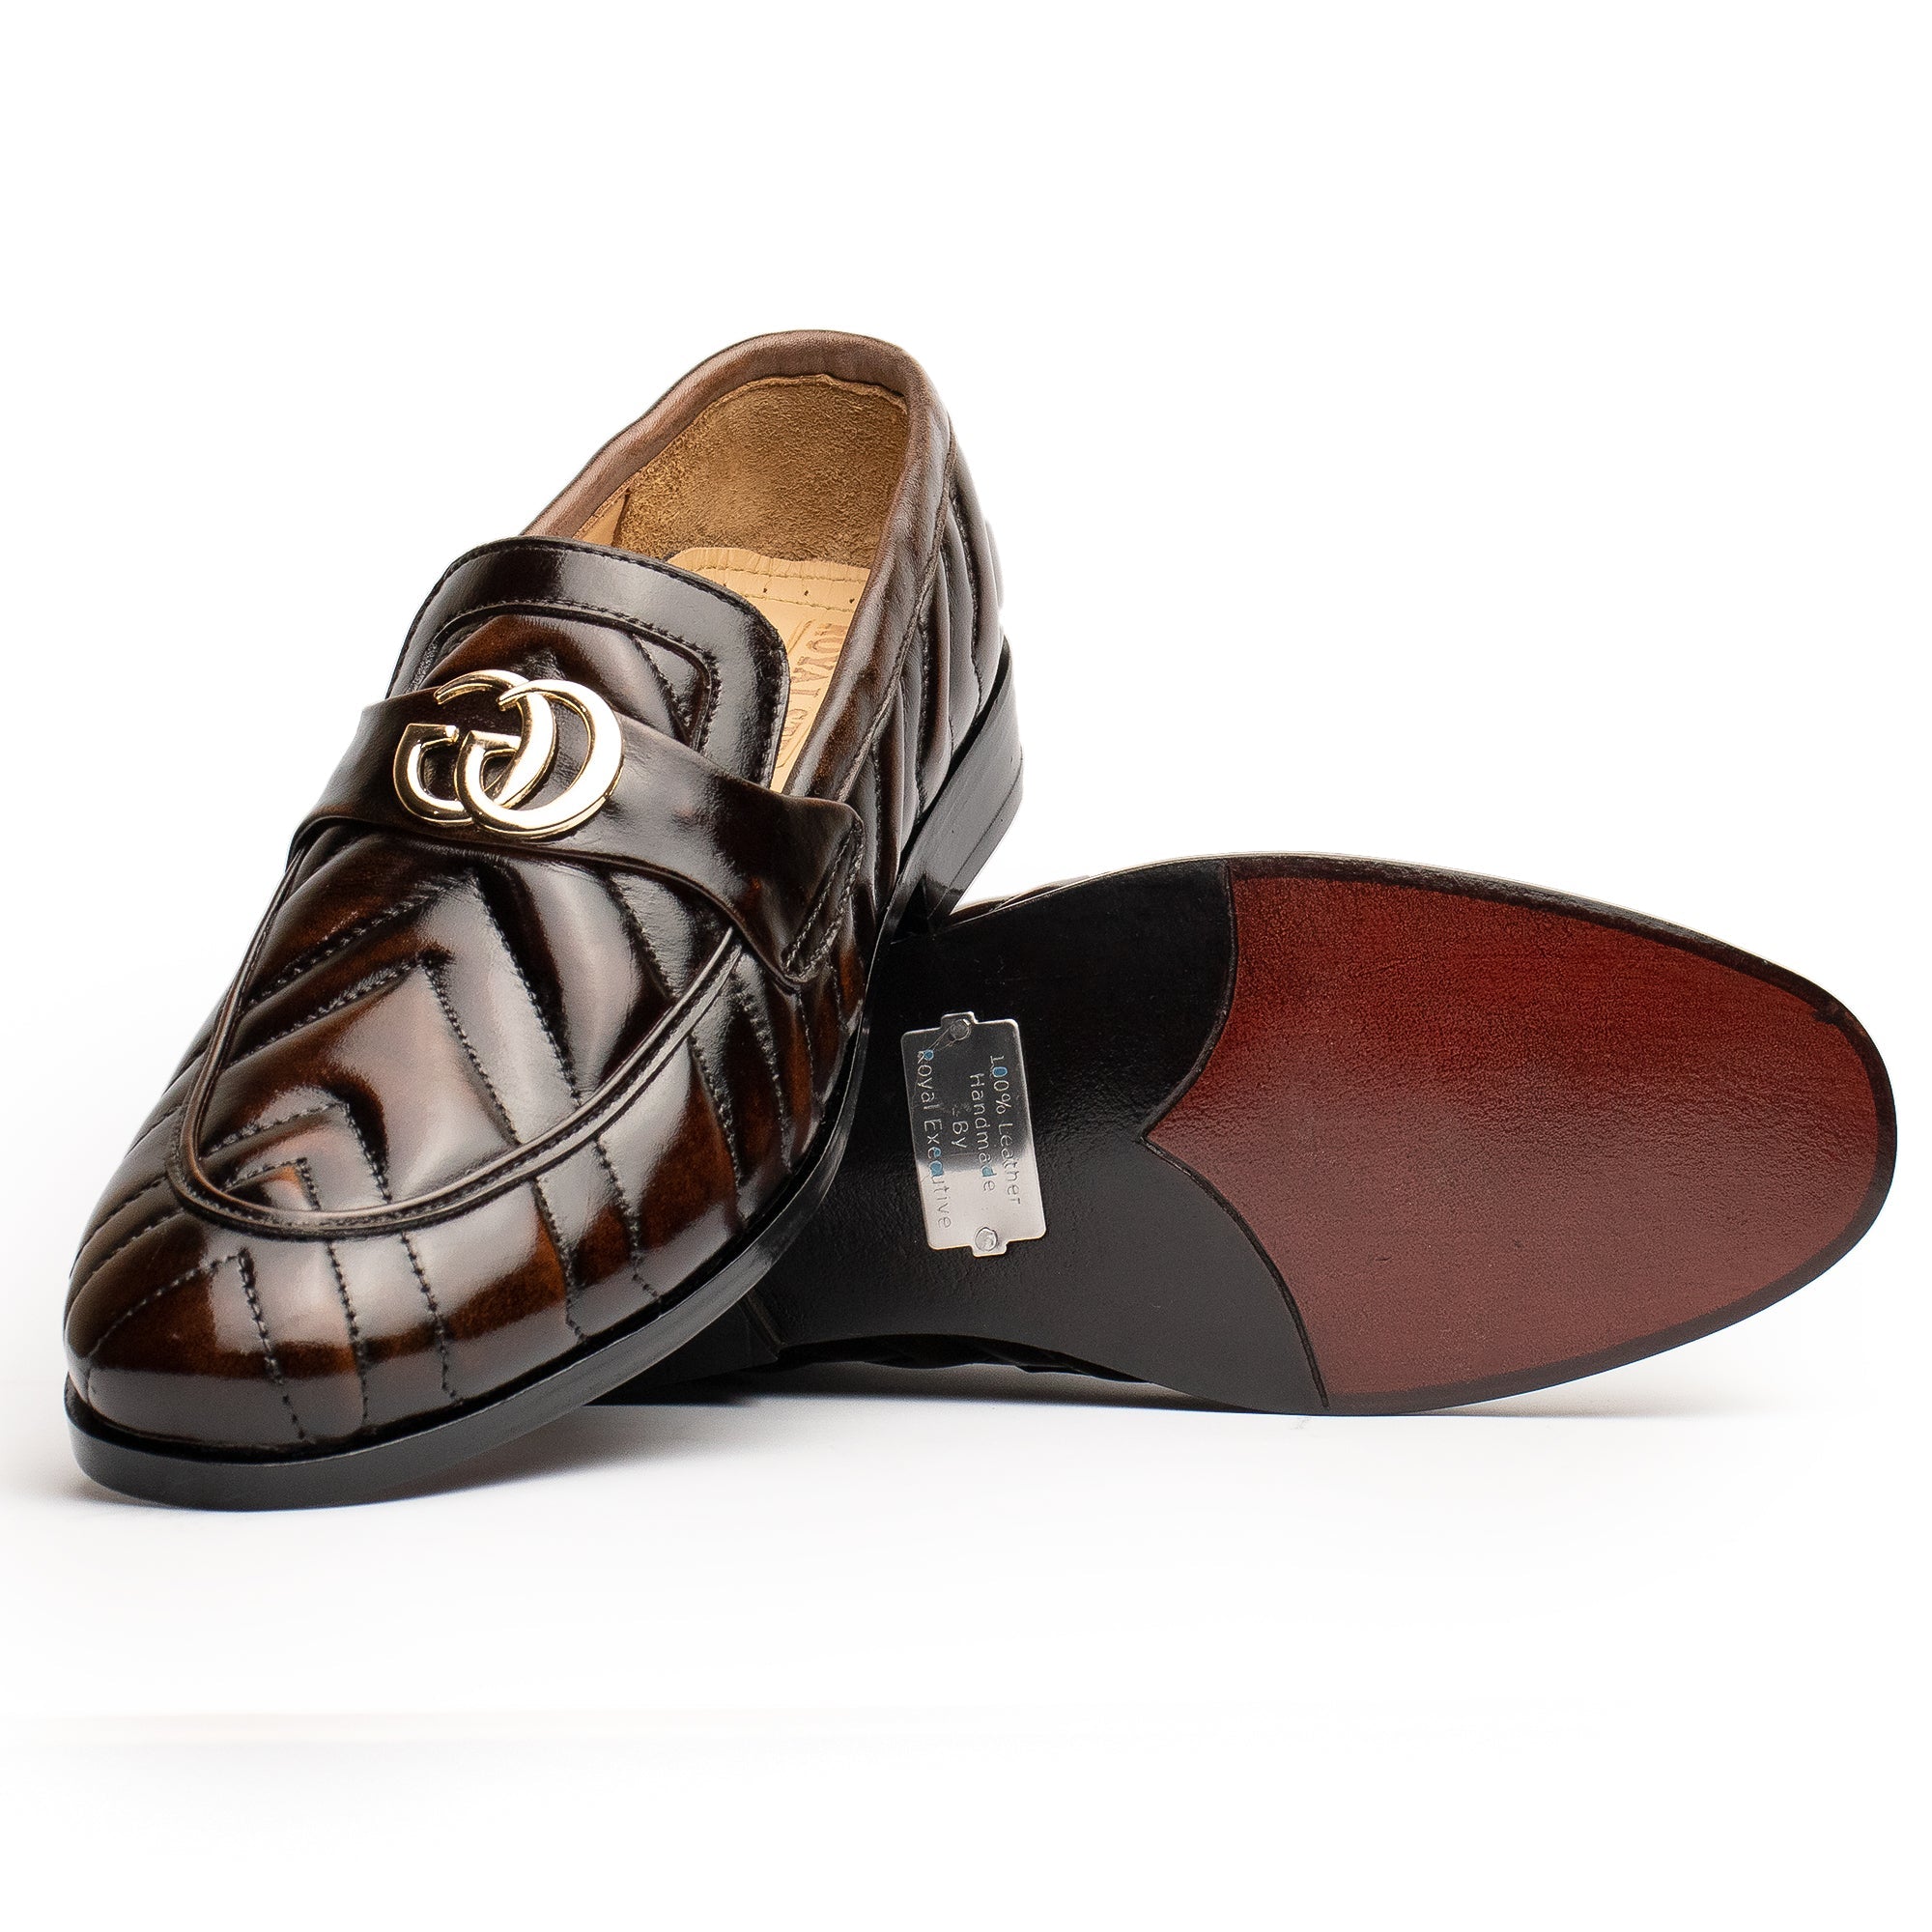 GG-Patina - Premium Shoes from royalstepshops - Just Rs.9000! Shop now at ROYAL STEP